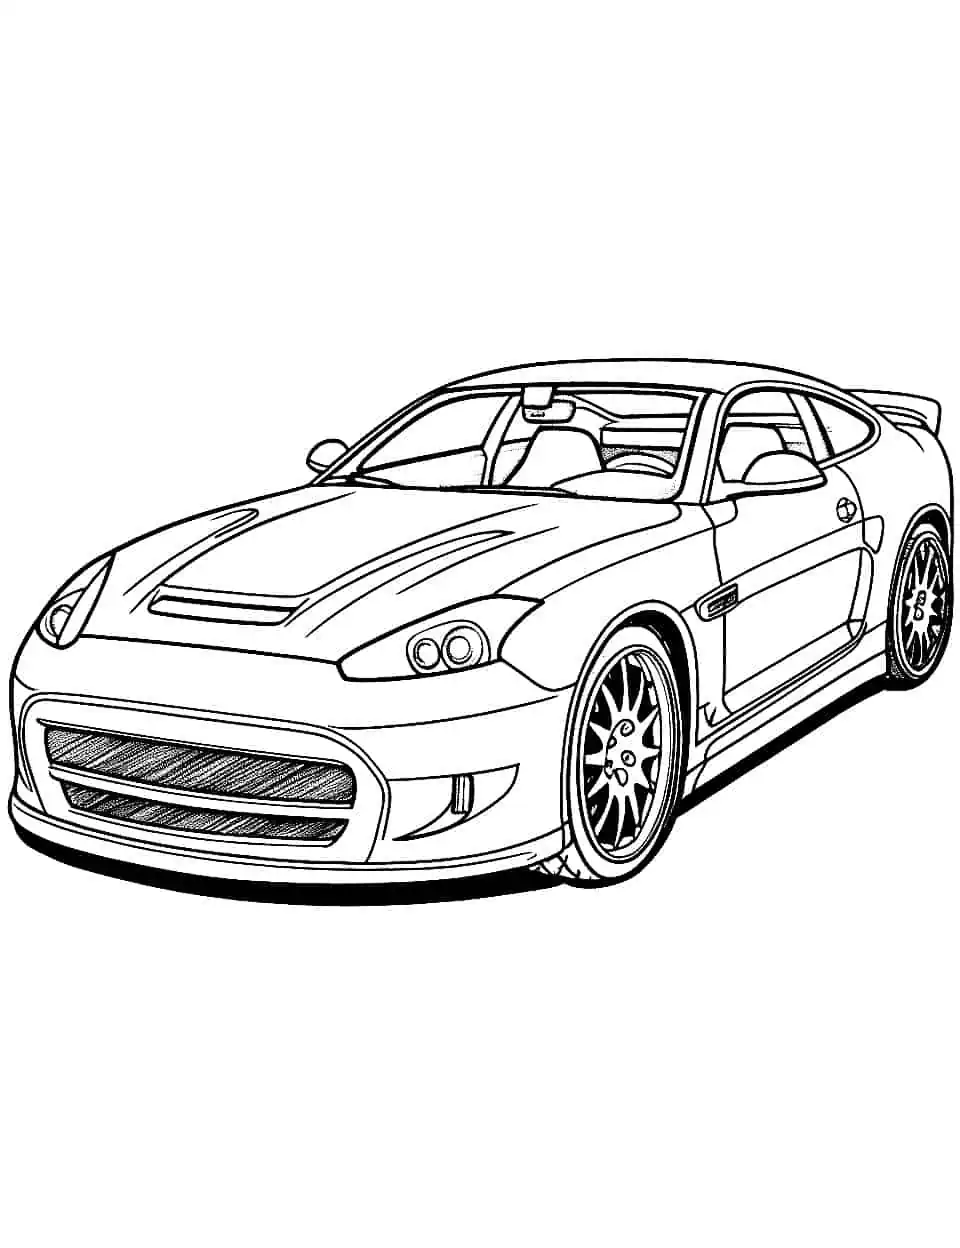 Detailed Luxury Car Coloring Page - A highly detailed luxury car for those who love coloring intricate details.